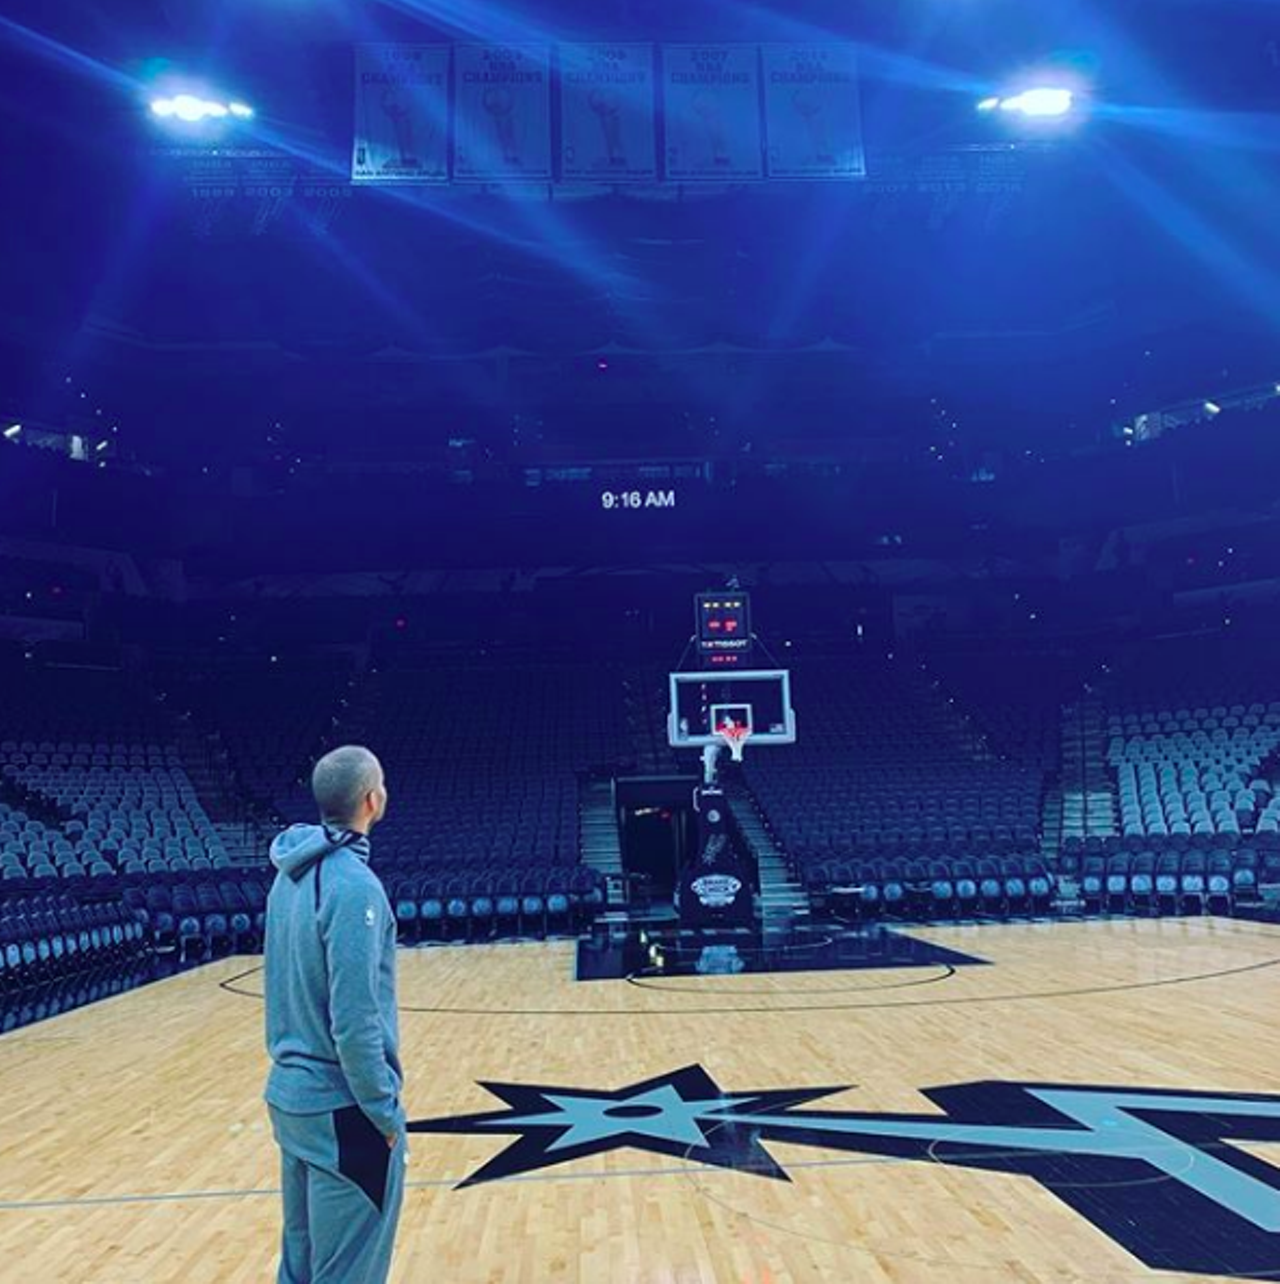 He didn’t insist on a farewell season.
Like the other members of the Big Three, Parker didn’t announce his retirement until after the season. He said he didn’t see the point of having a “farewell season” since it wasn’t with the Spurs.
Photo via Instagram / _tonyparker09